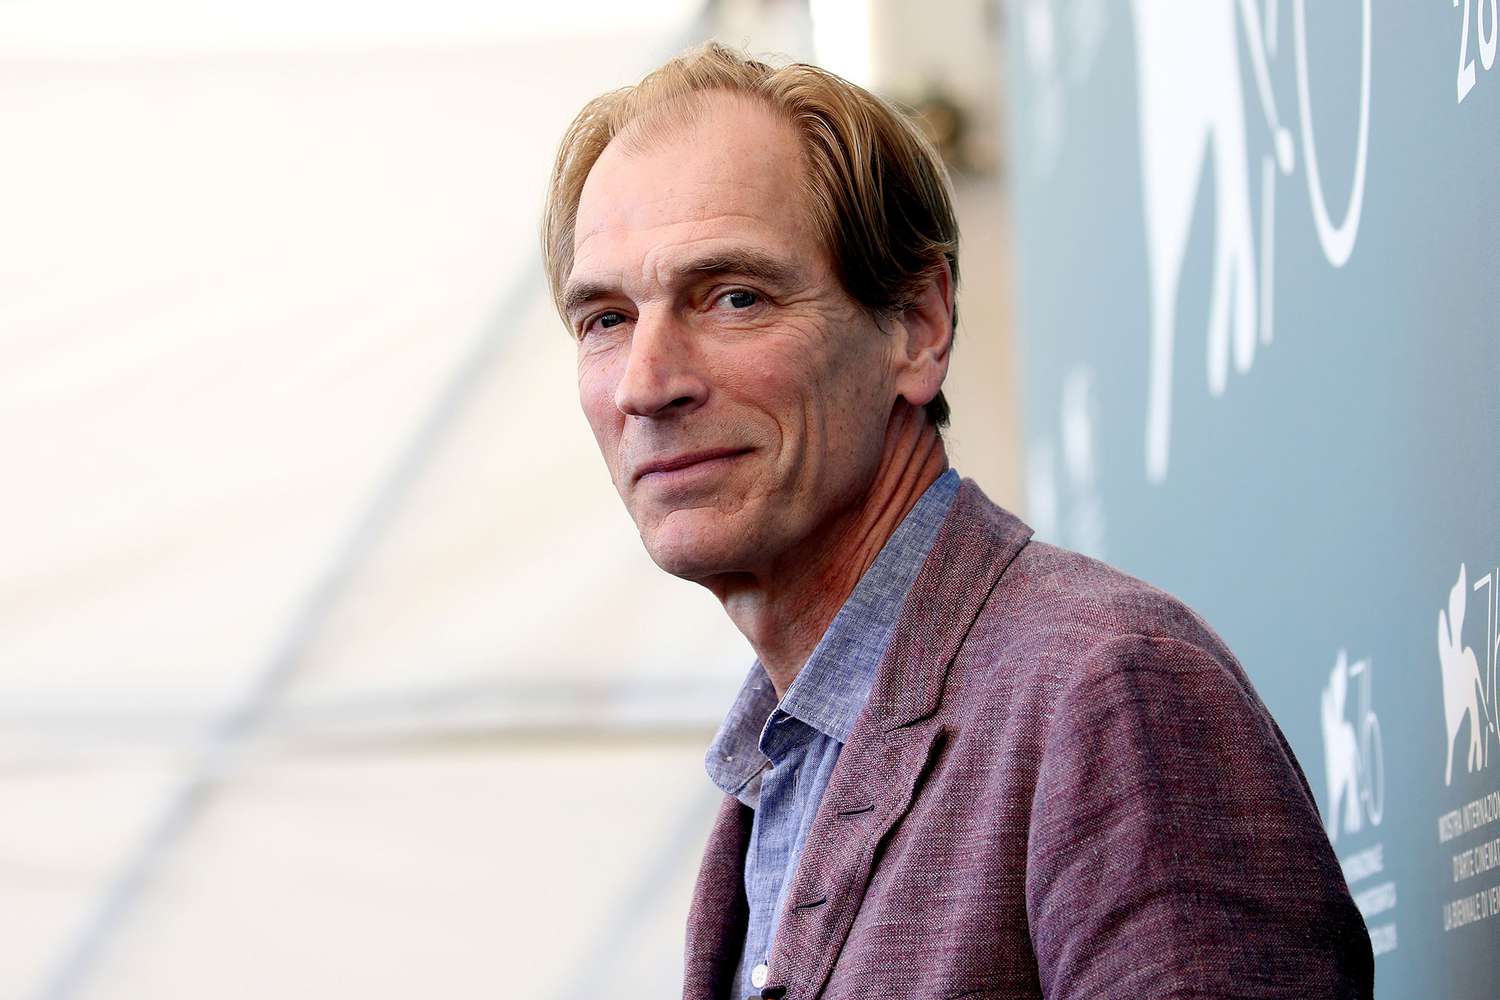 Julian Sands attends 'The Painted Bird' photocall at the 76th Venice Film Festival on September 3, 2019, in Venice, Italy